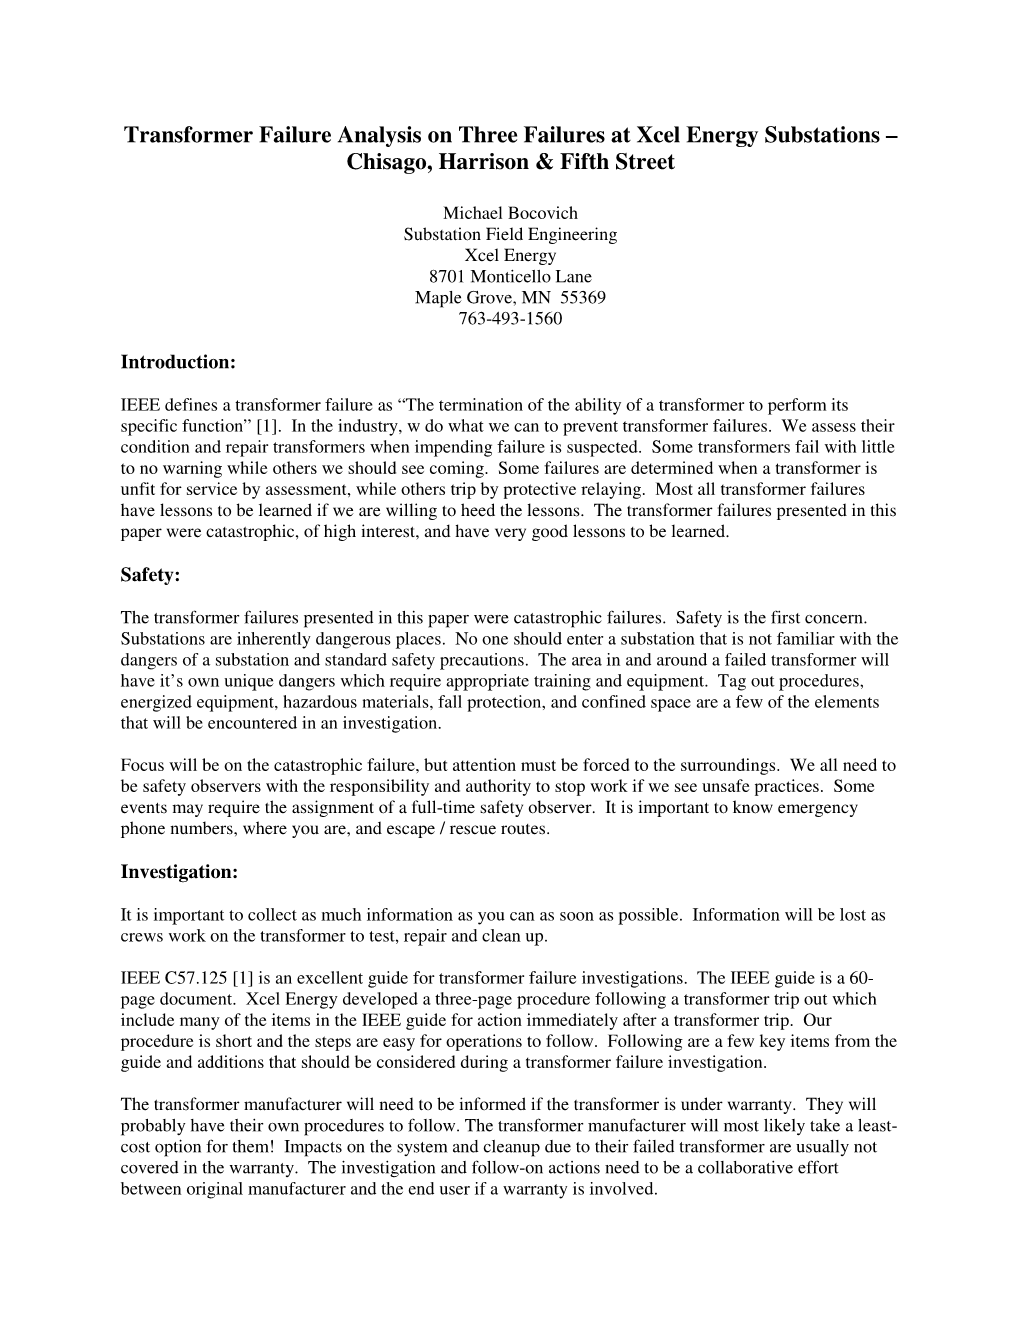 Transformer Failure Analysis on Three Failures at Xcel Energy Substations – Chisago, Harrison & Fifth Street